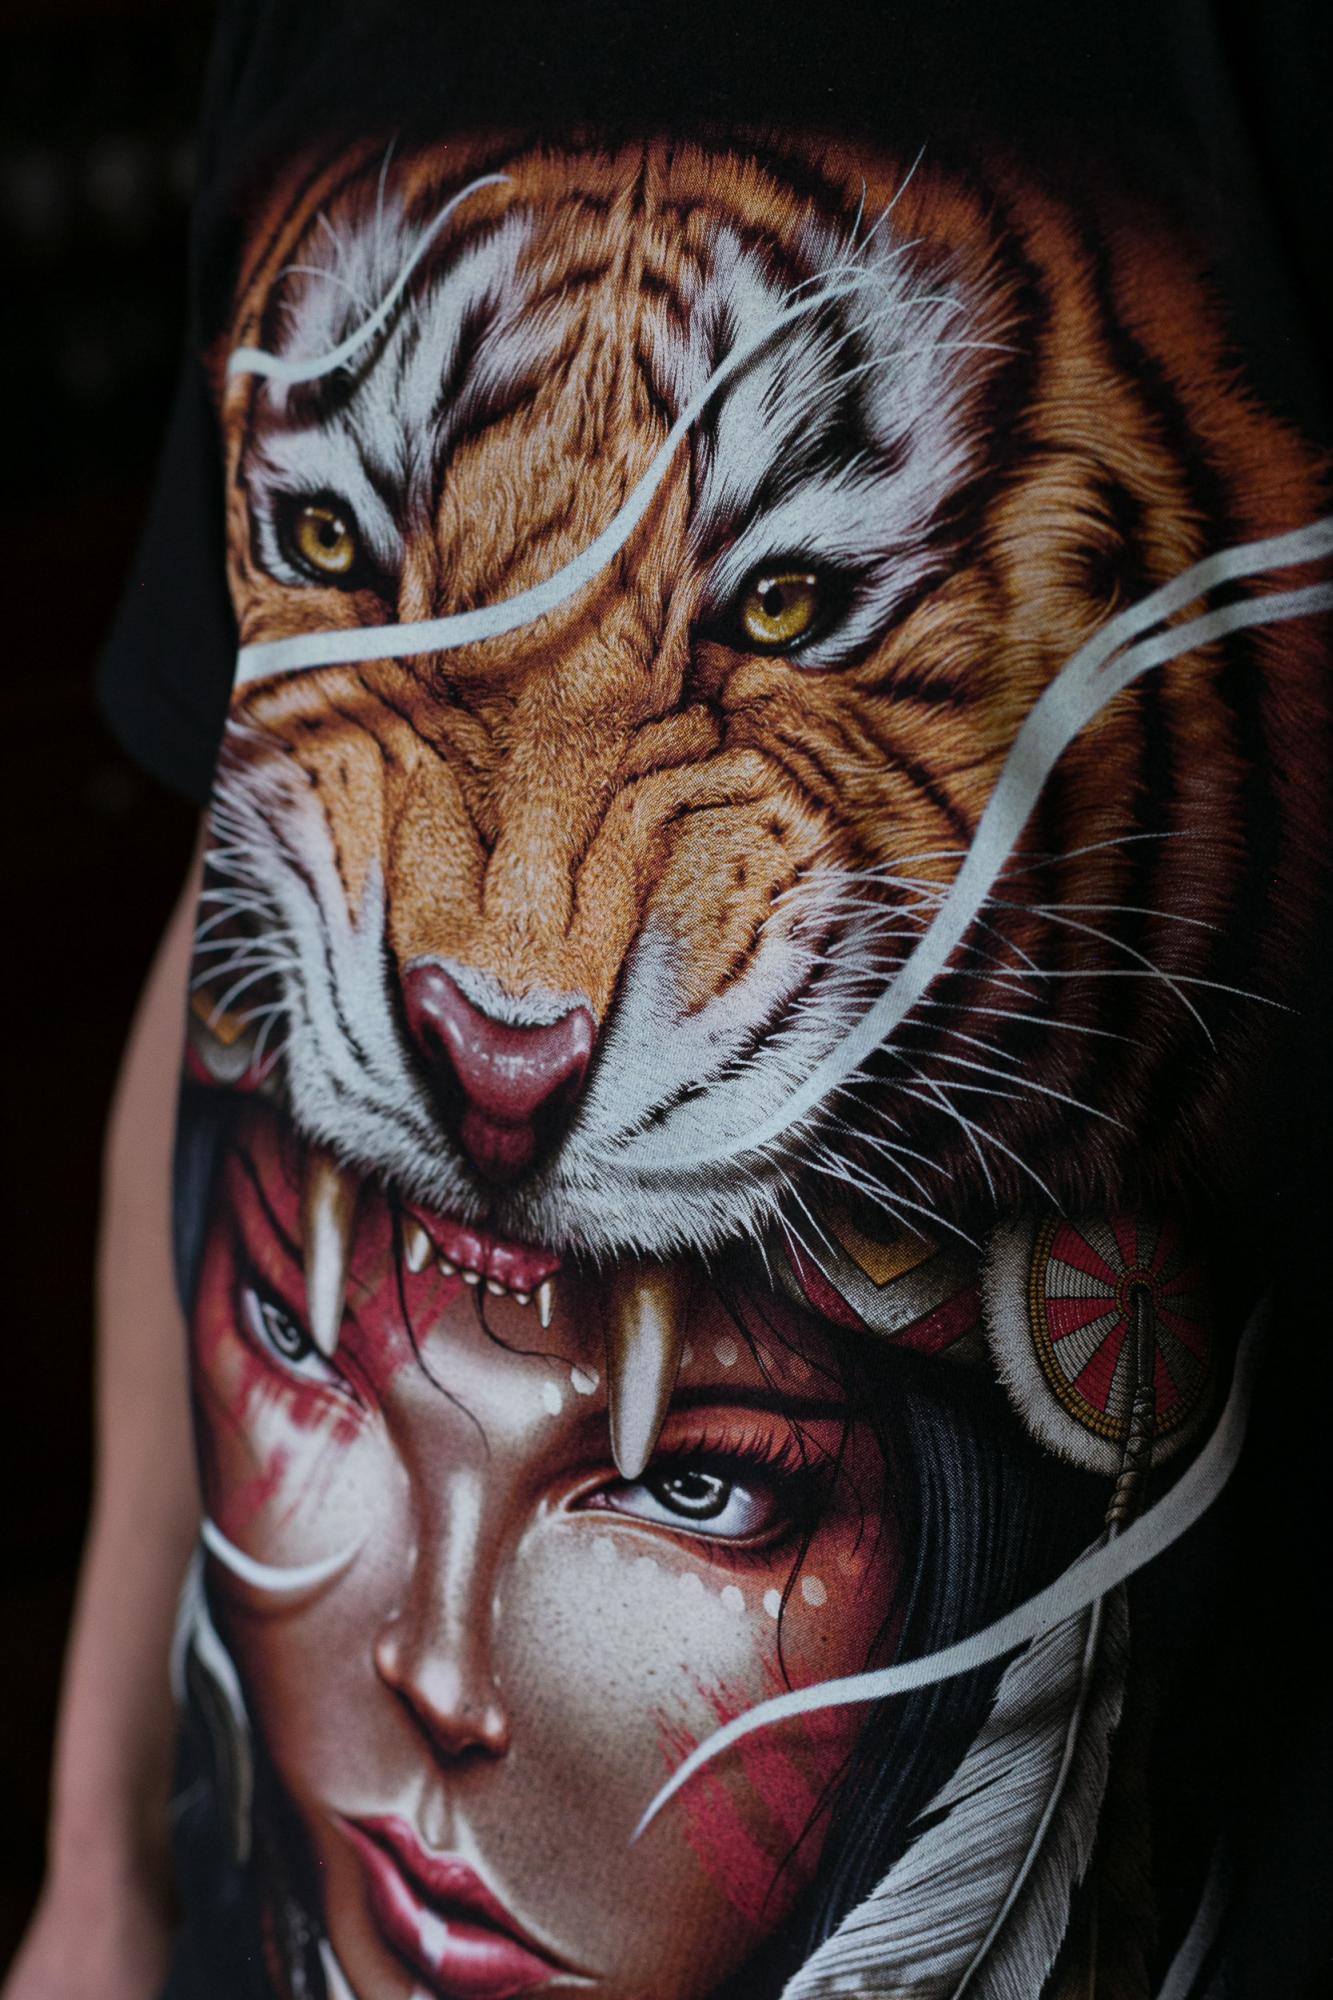 Return to China? Xing would rather die in the jungle - T-shirt of a Chinese migrant. The tiger is associated...